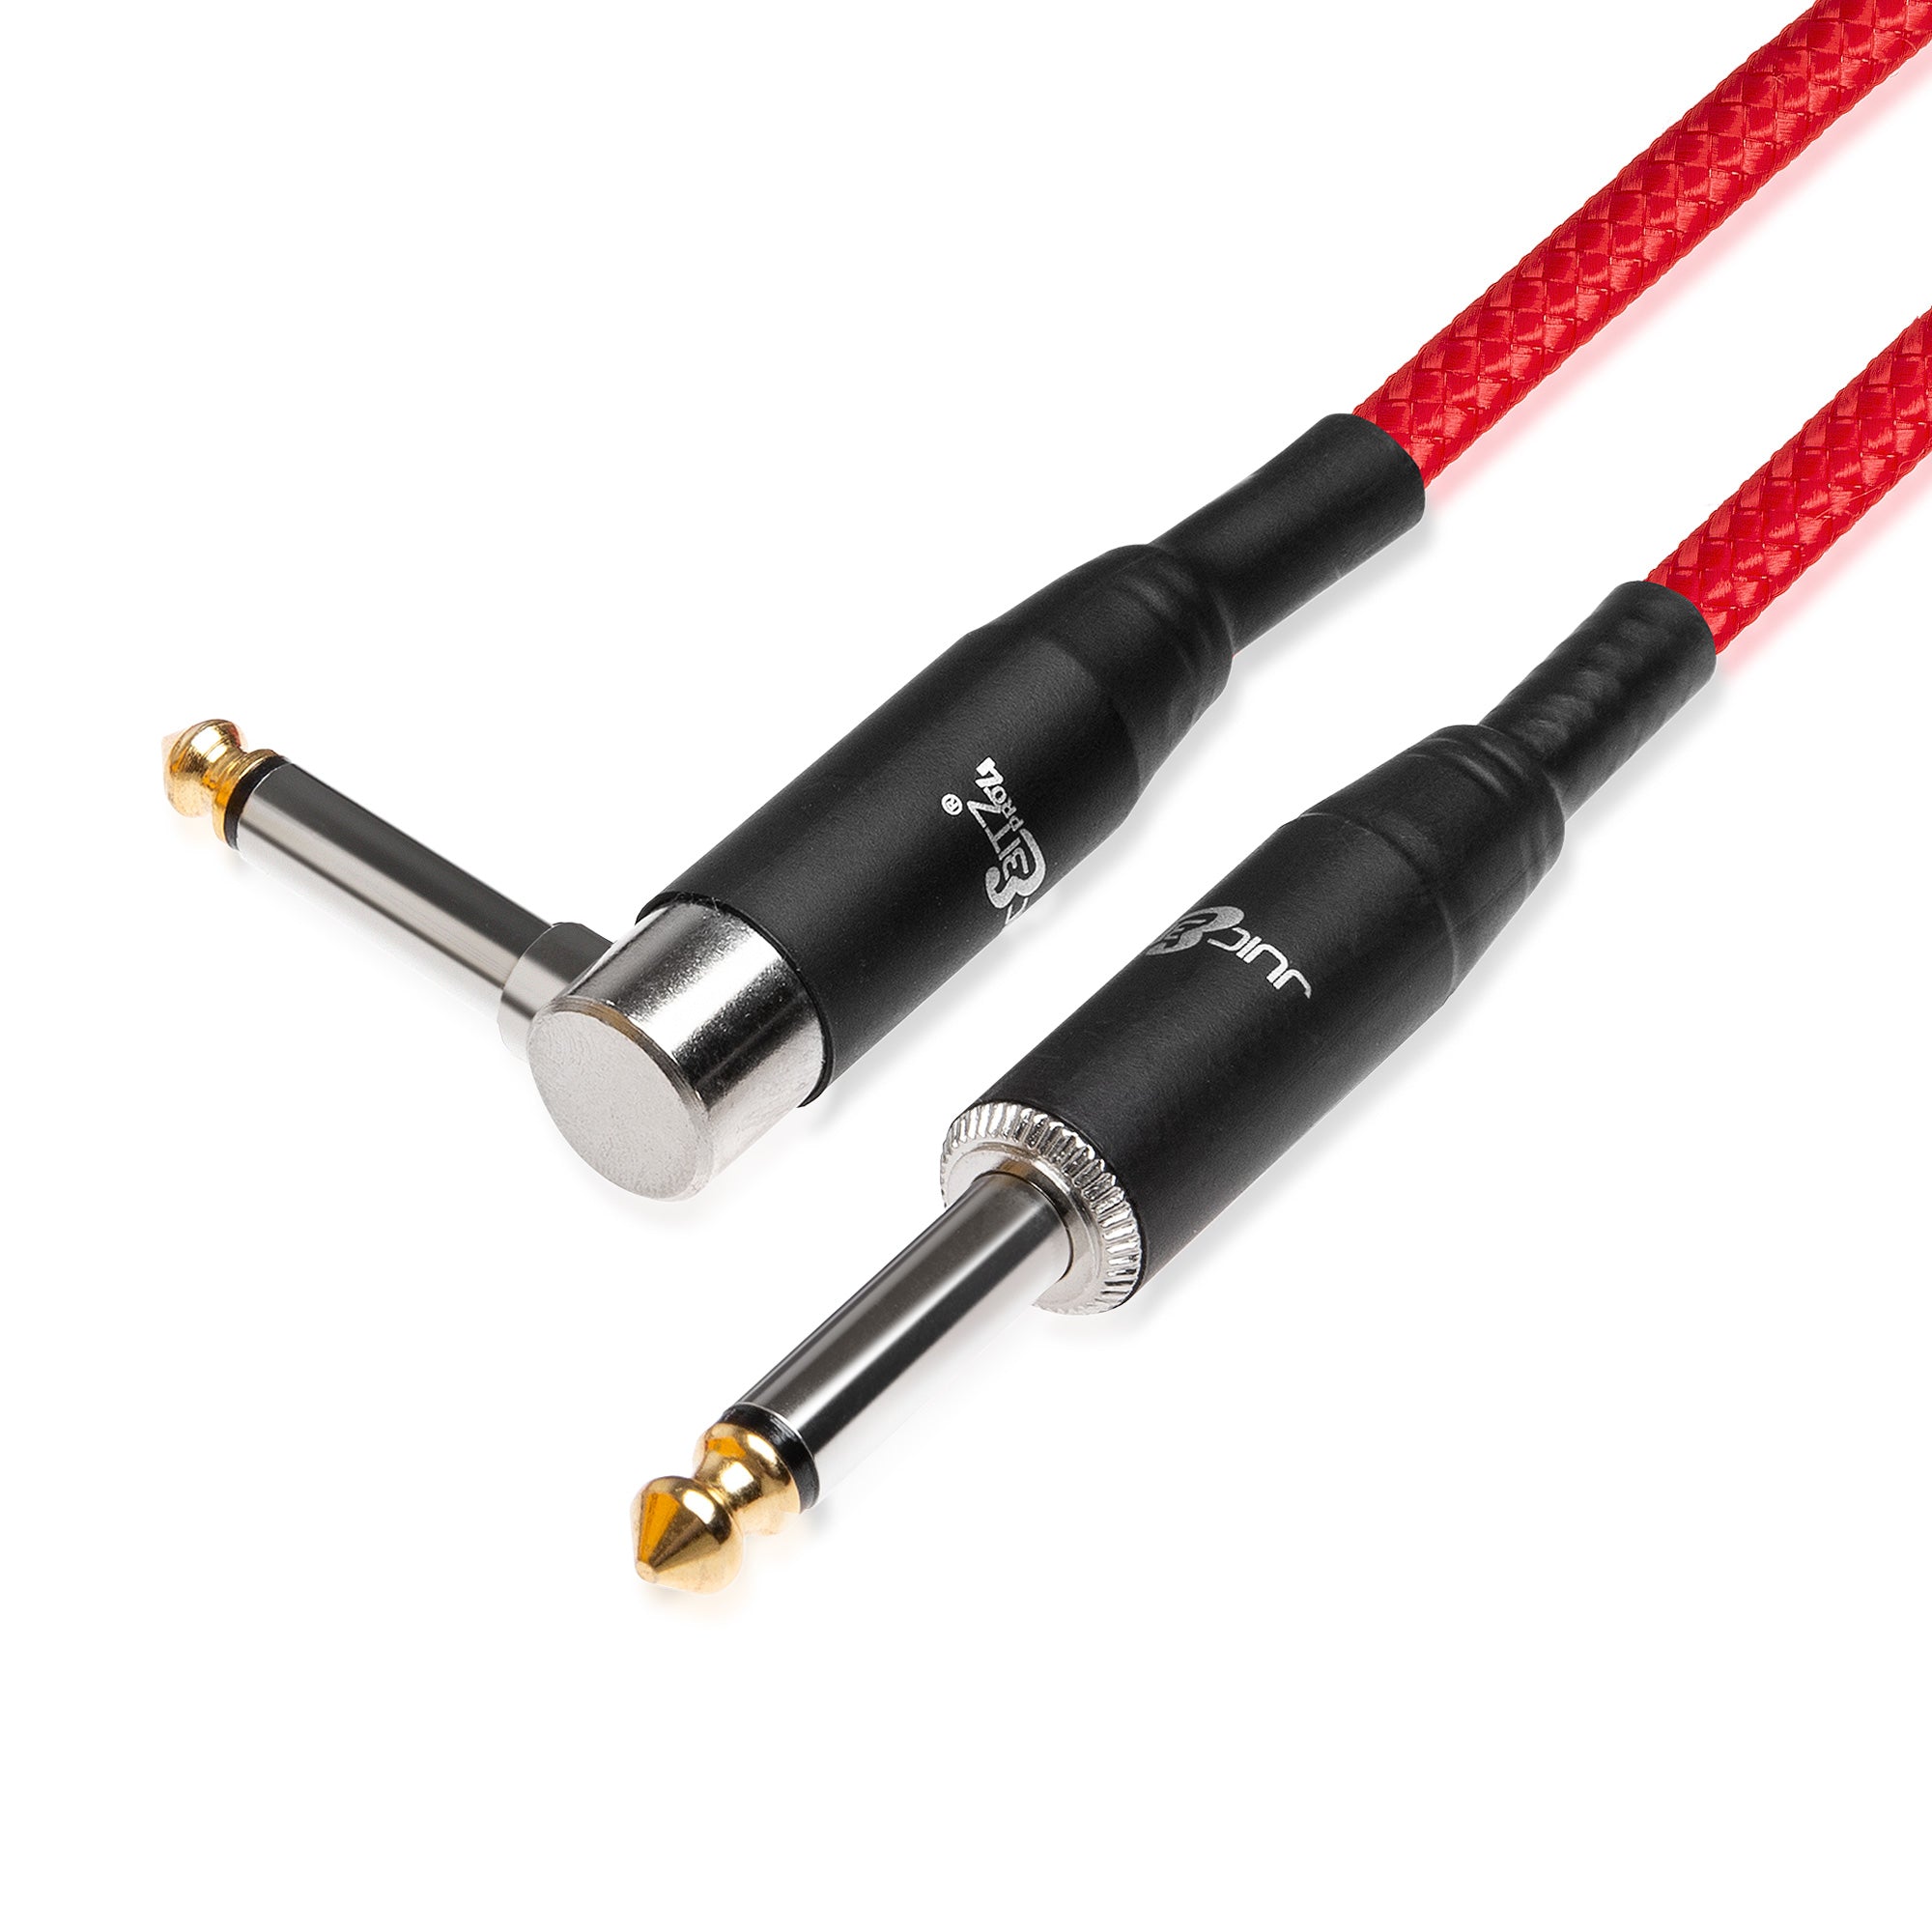 PRO Series Braided Guitar Cable 1/4" Straight/Angled Jack to Jack 6.35mm Lead - Red